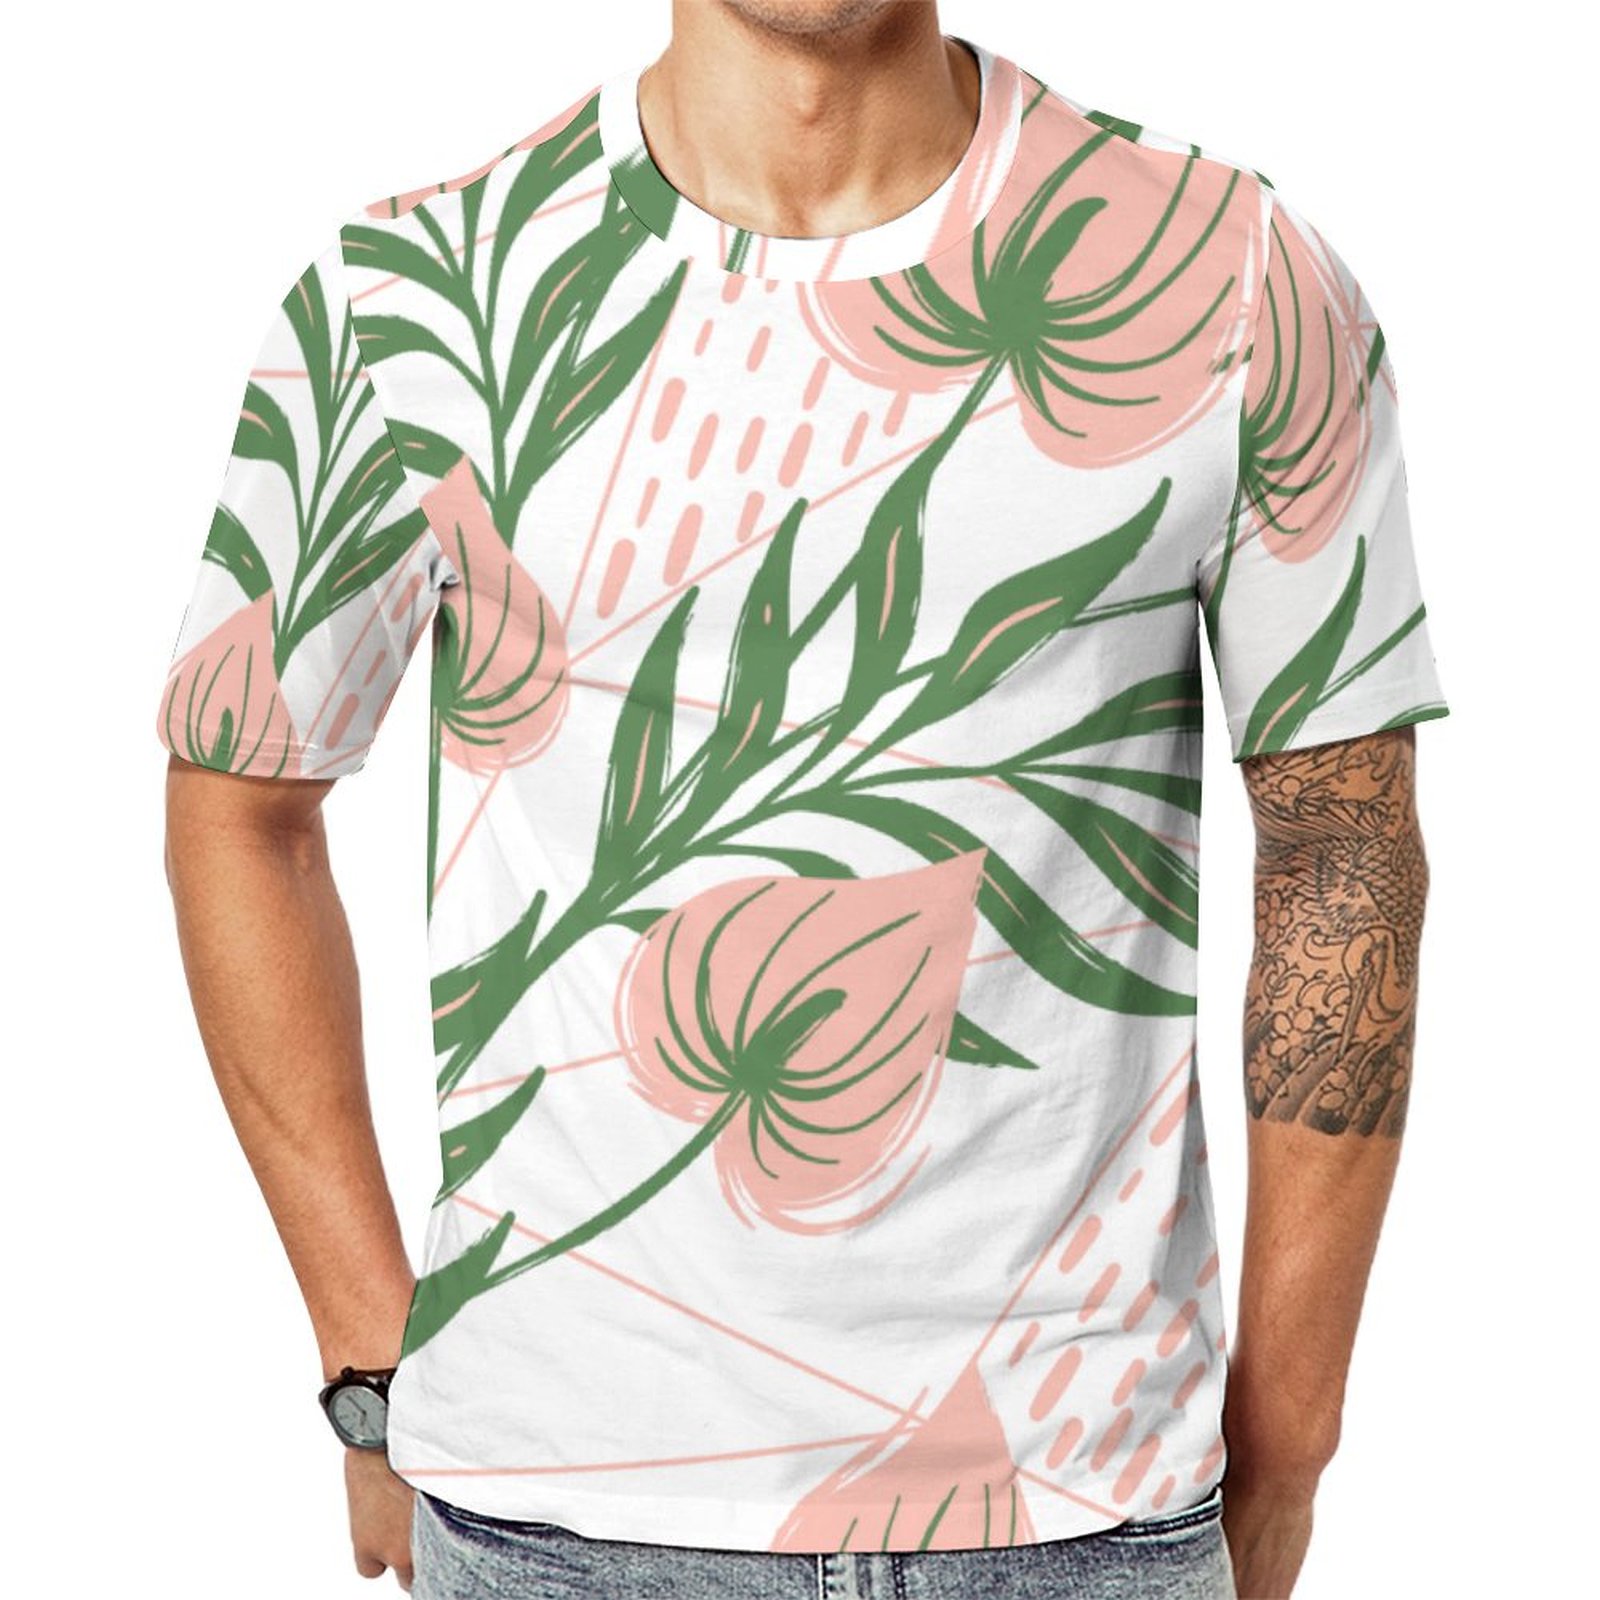 Floral Pink Green Pastel Short Sleeve Print Unisex Tshirt Summer Casual Tees for Men and Women Coolcoshirts